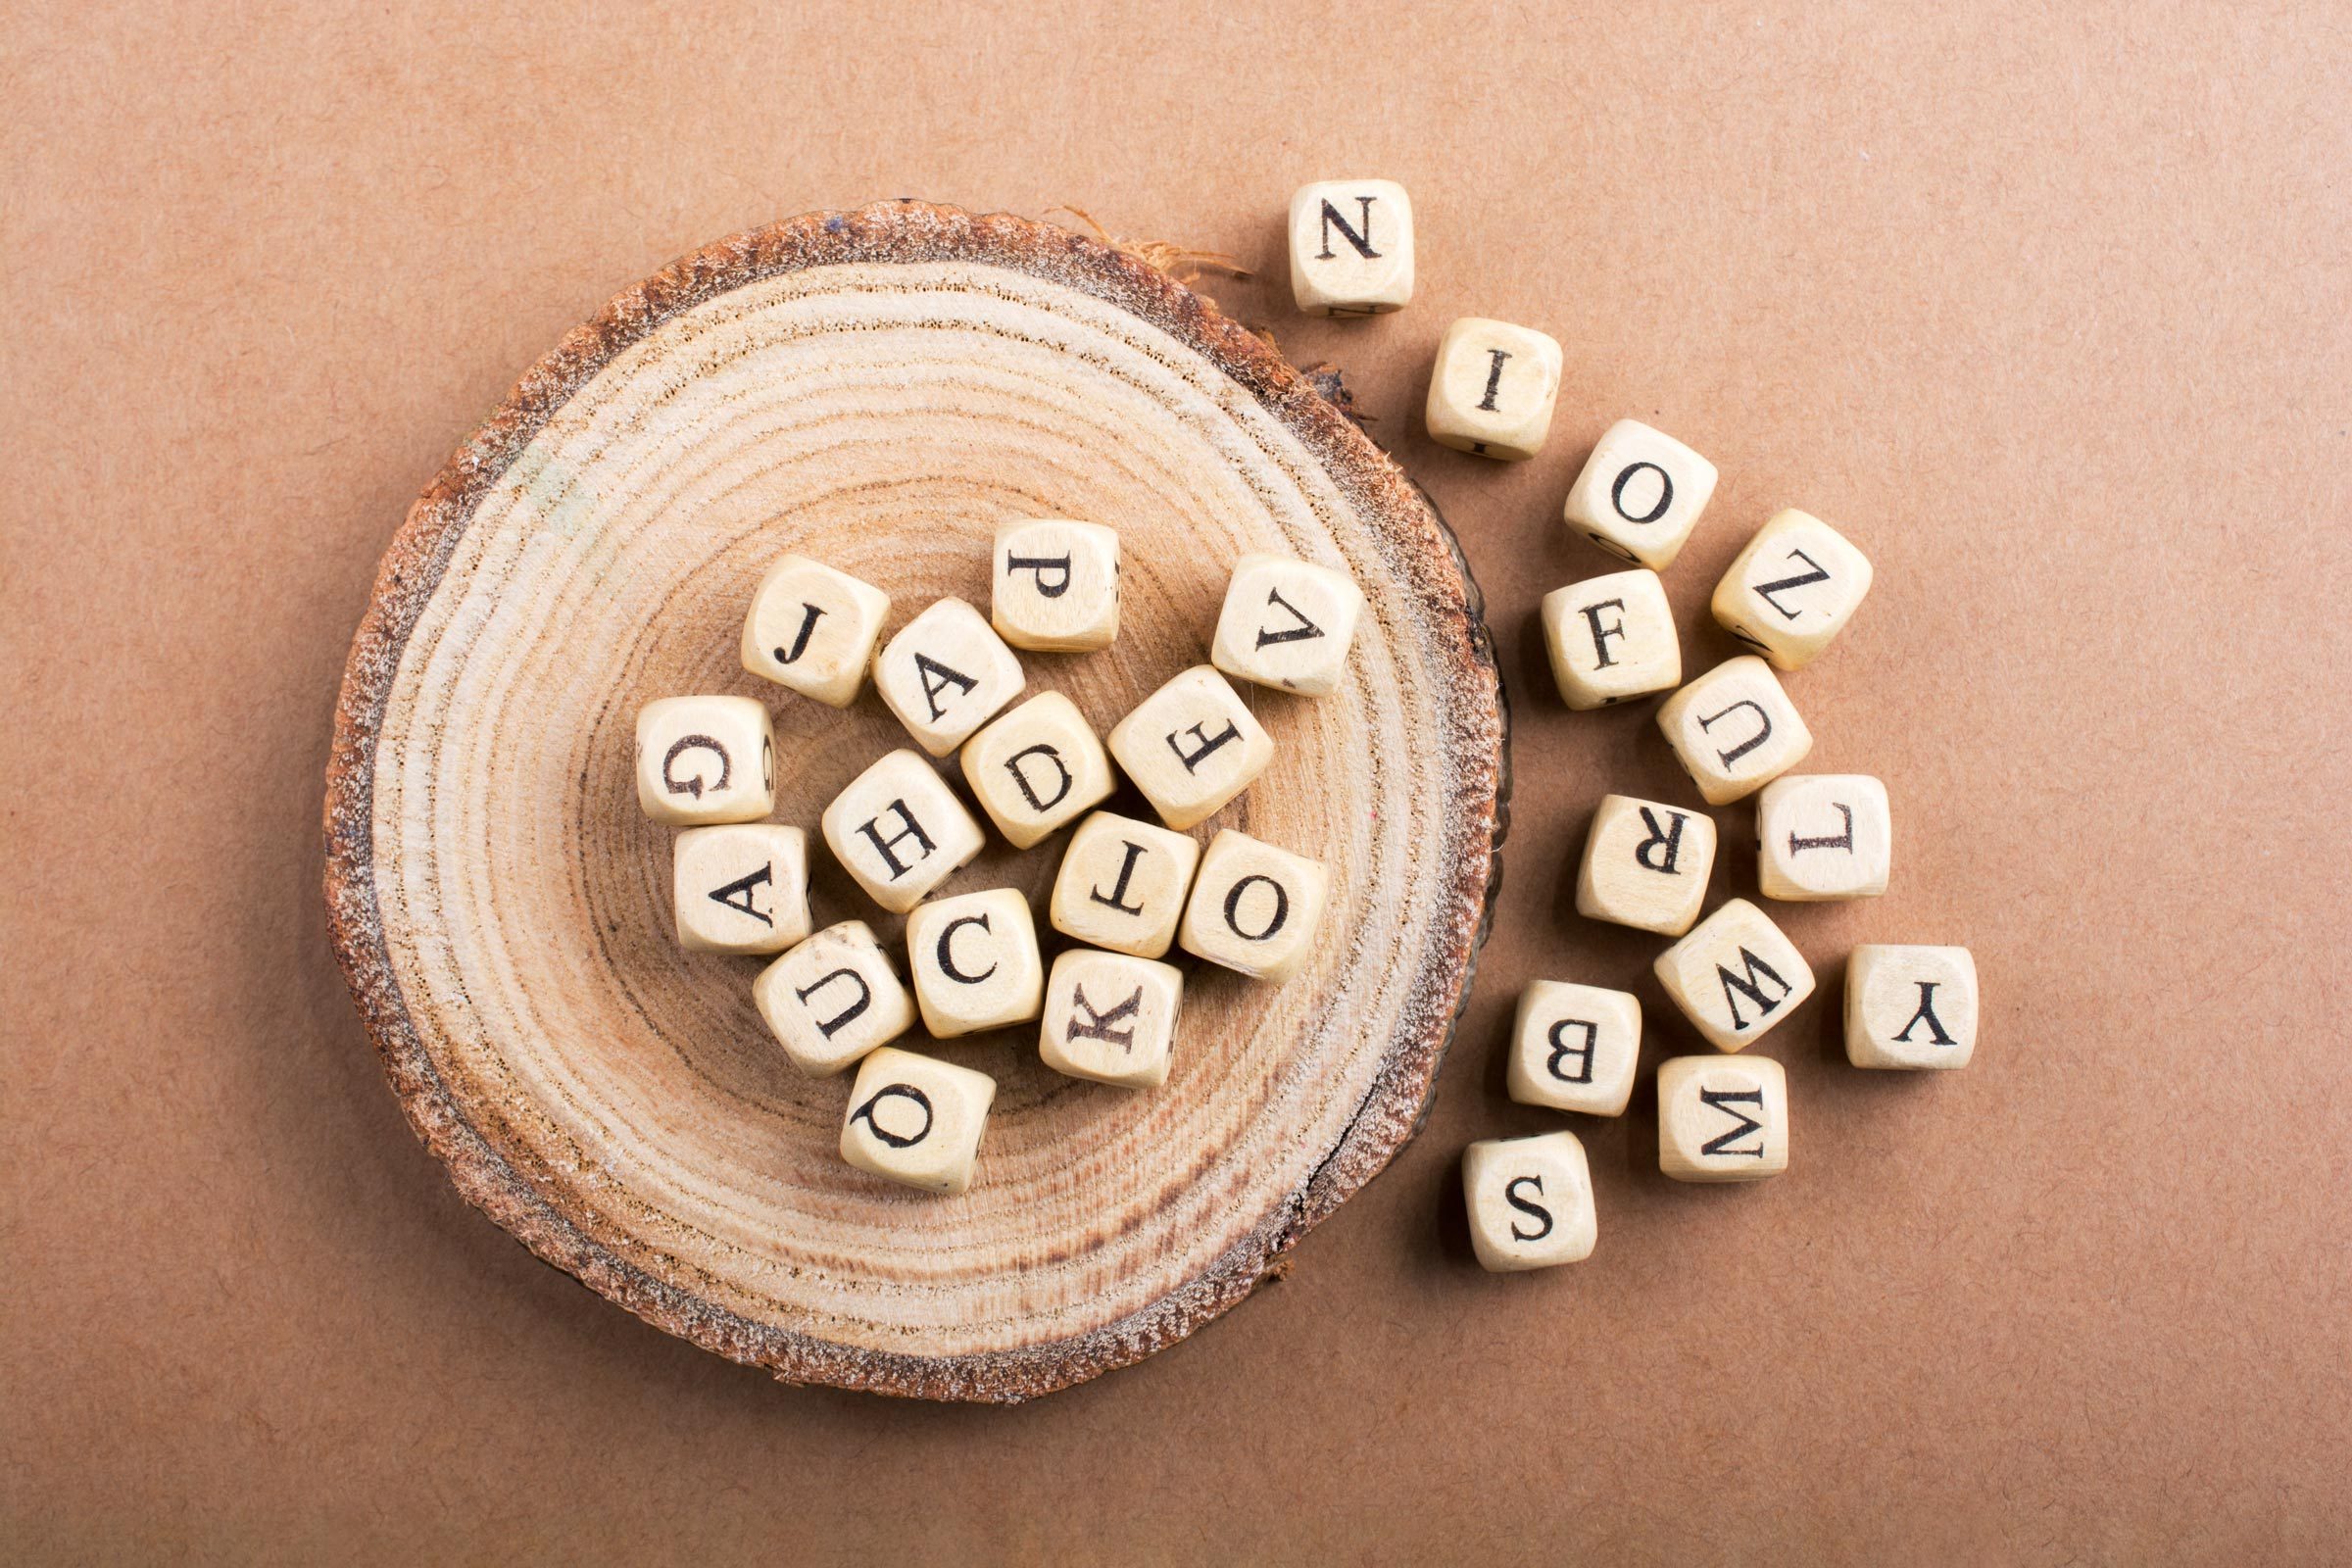 Word Puzzles That Will Leave You Stumped | Reader's Digest